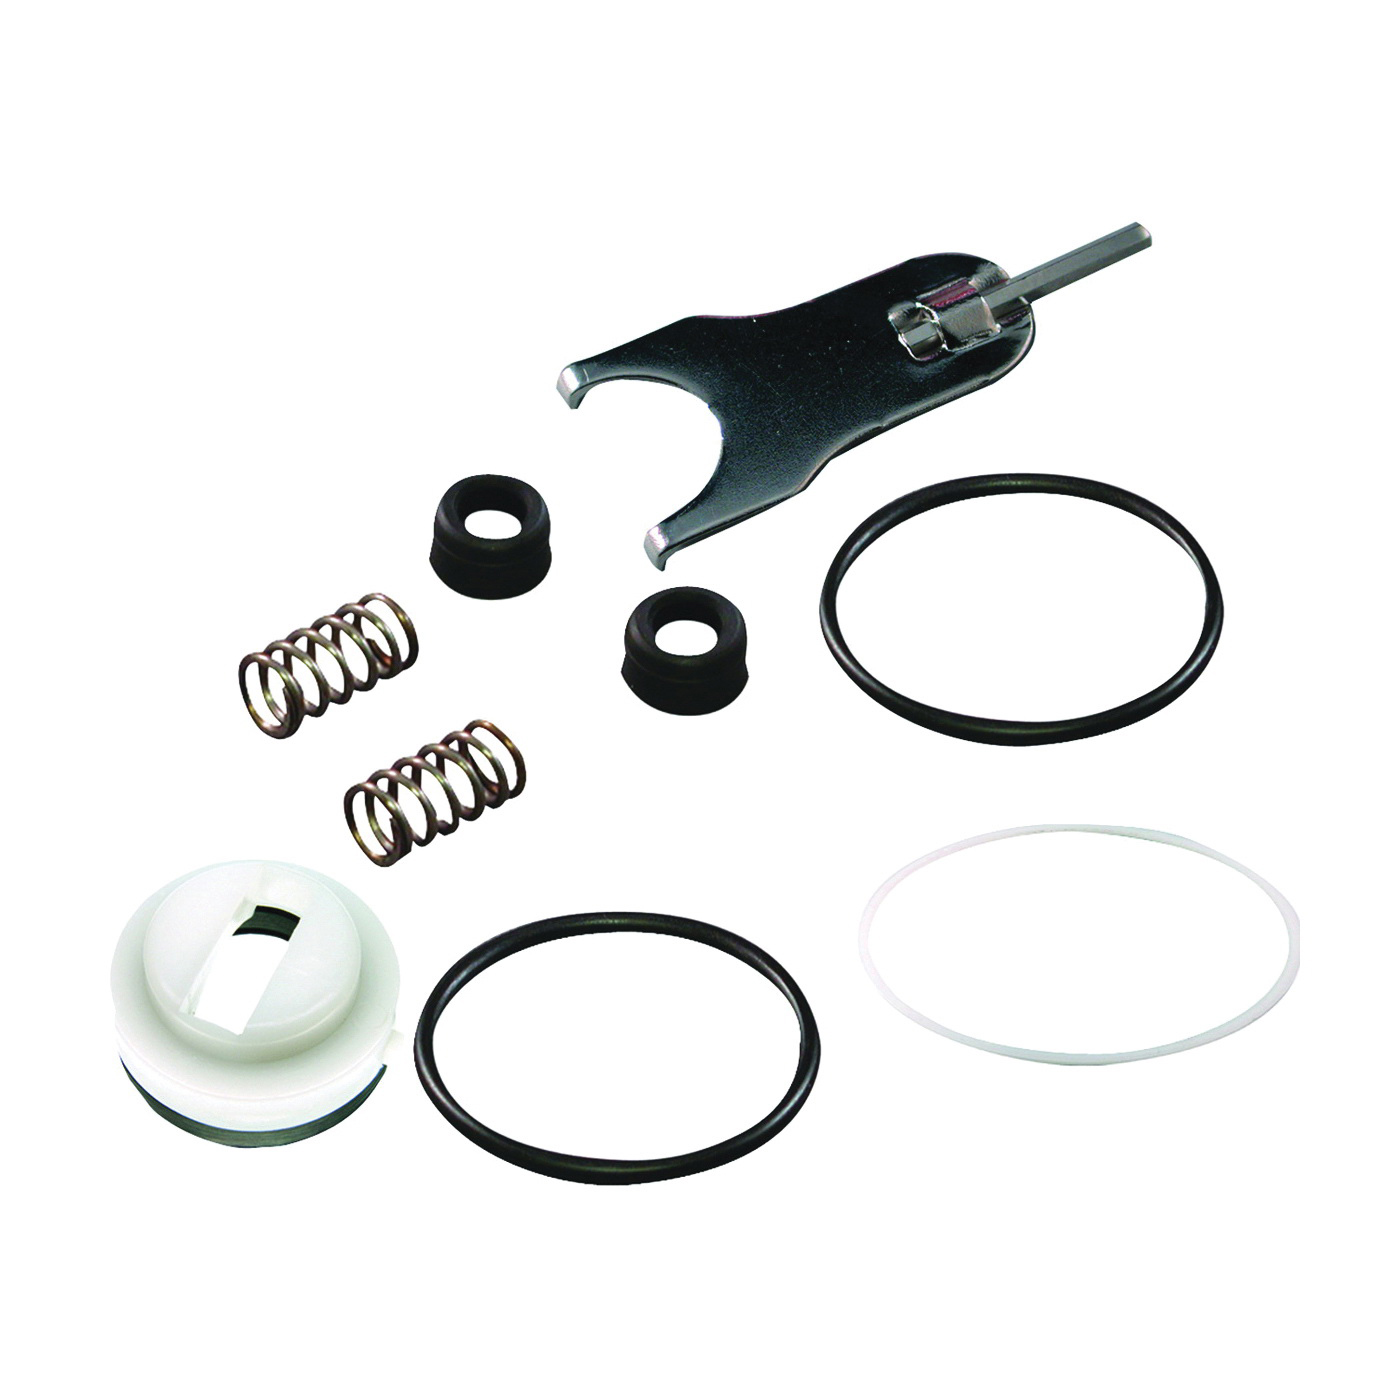 DL-7 Series 80702 Cartridge Repair Kit, Stainless Steel, For: Delta/Peerless Faucets with #212 Ball